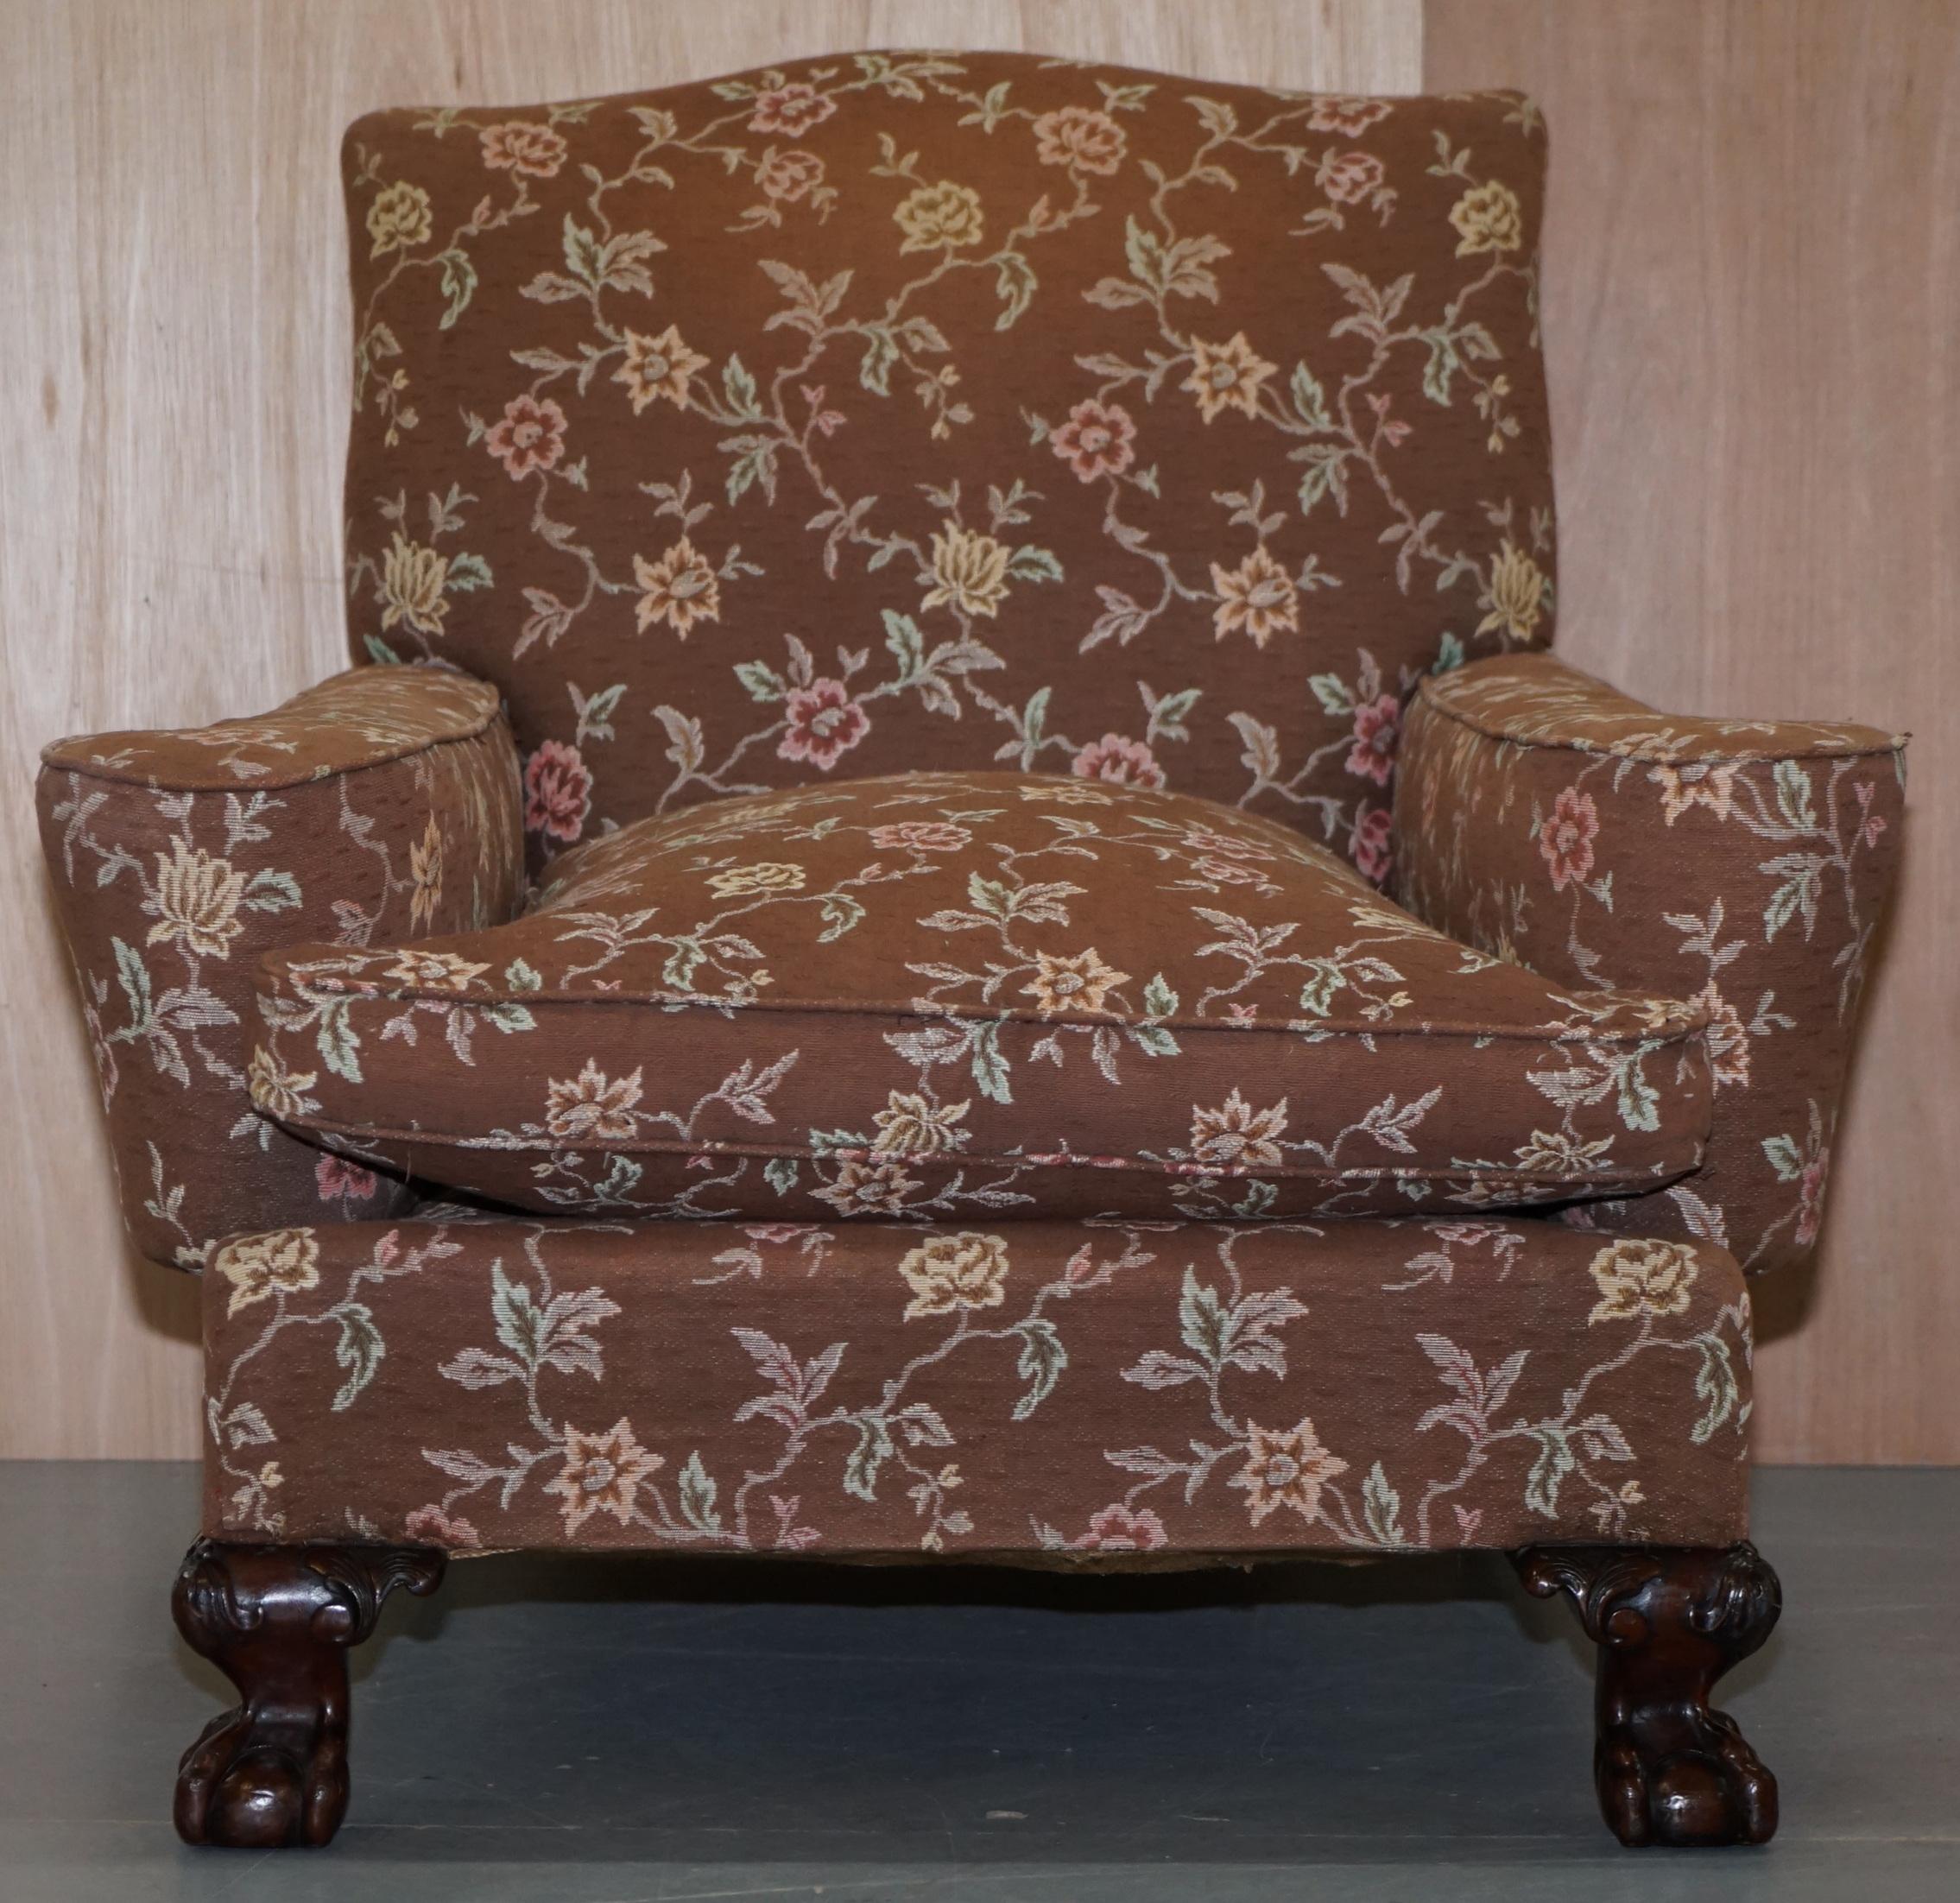 Ww are delighted to offer for sale this stunning original Victorian circa 1880 mahogany framed Claw & Ball feet with floral upholstery Library Club armchair

A well made and decorative armchair which is very comfortable, the feather filled base